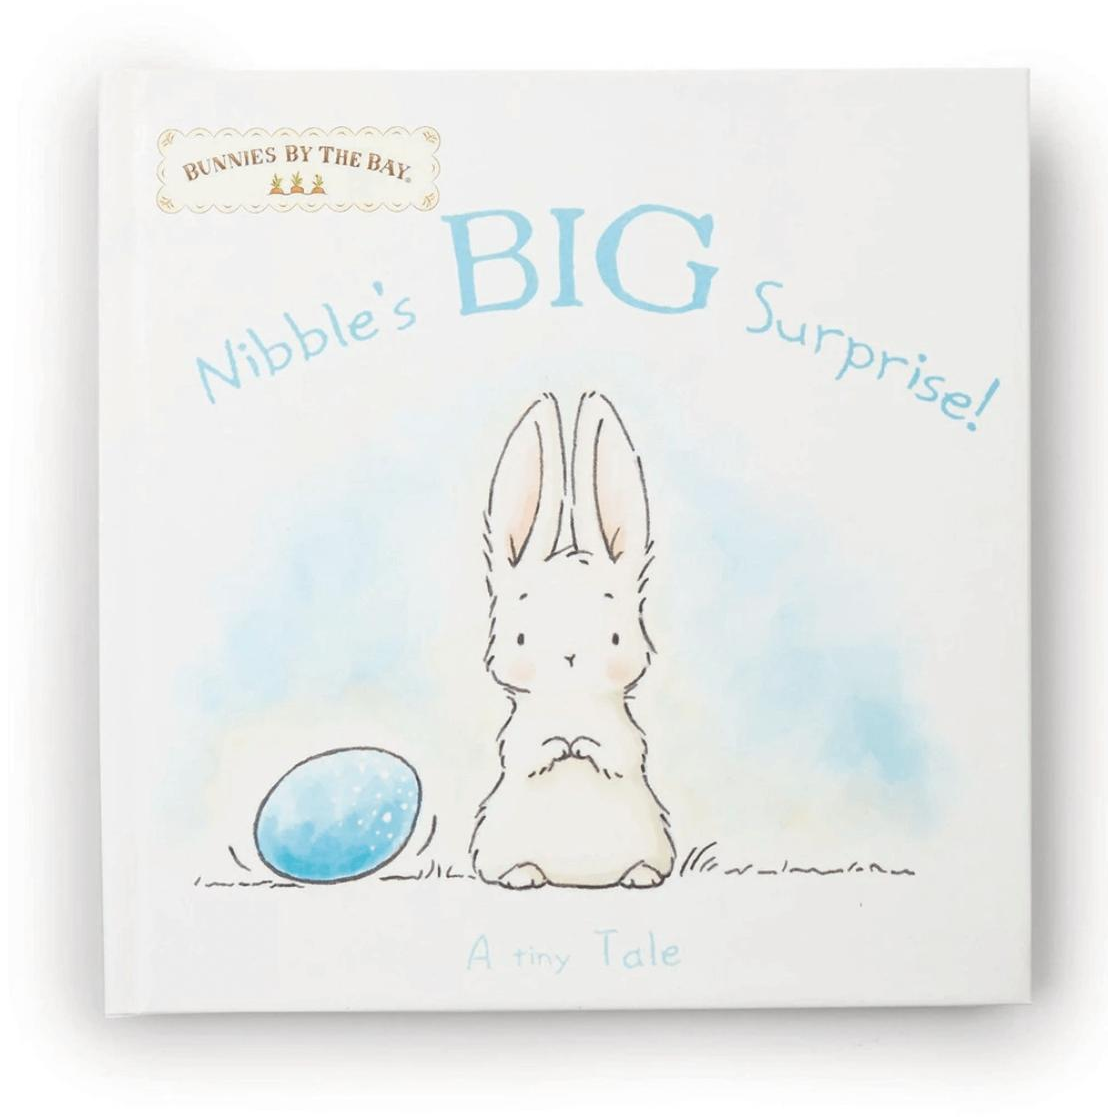 Nibbles Big Surprise By Bunnies By The Bay - Zinnias Gift Boutique